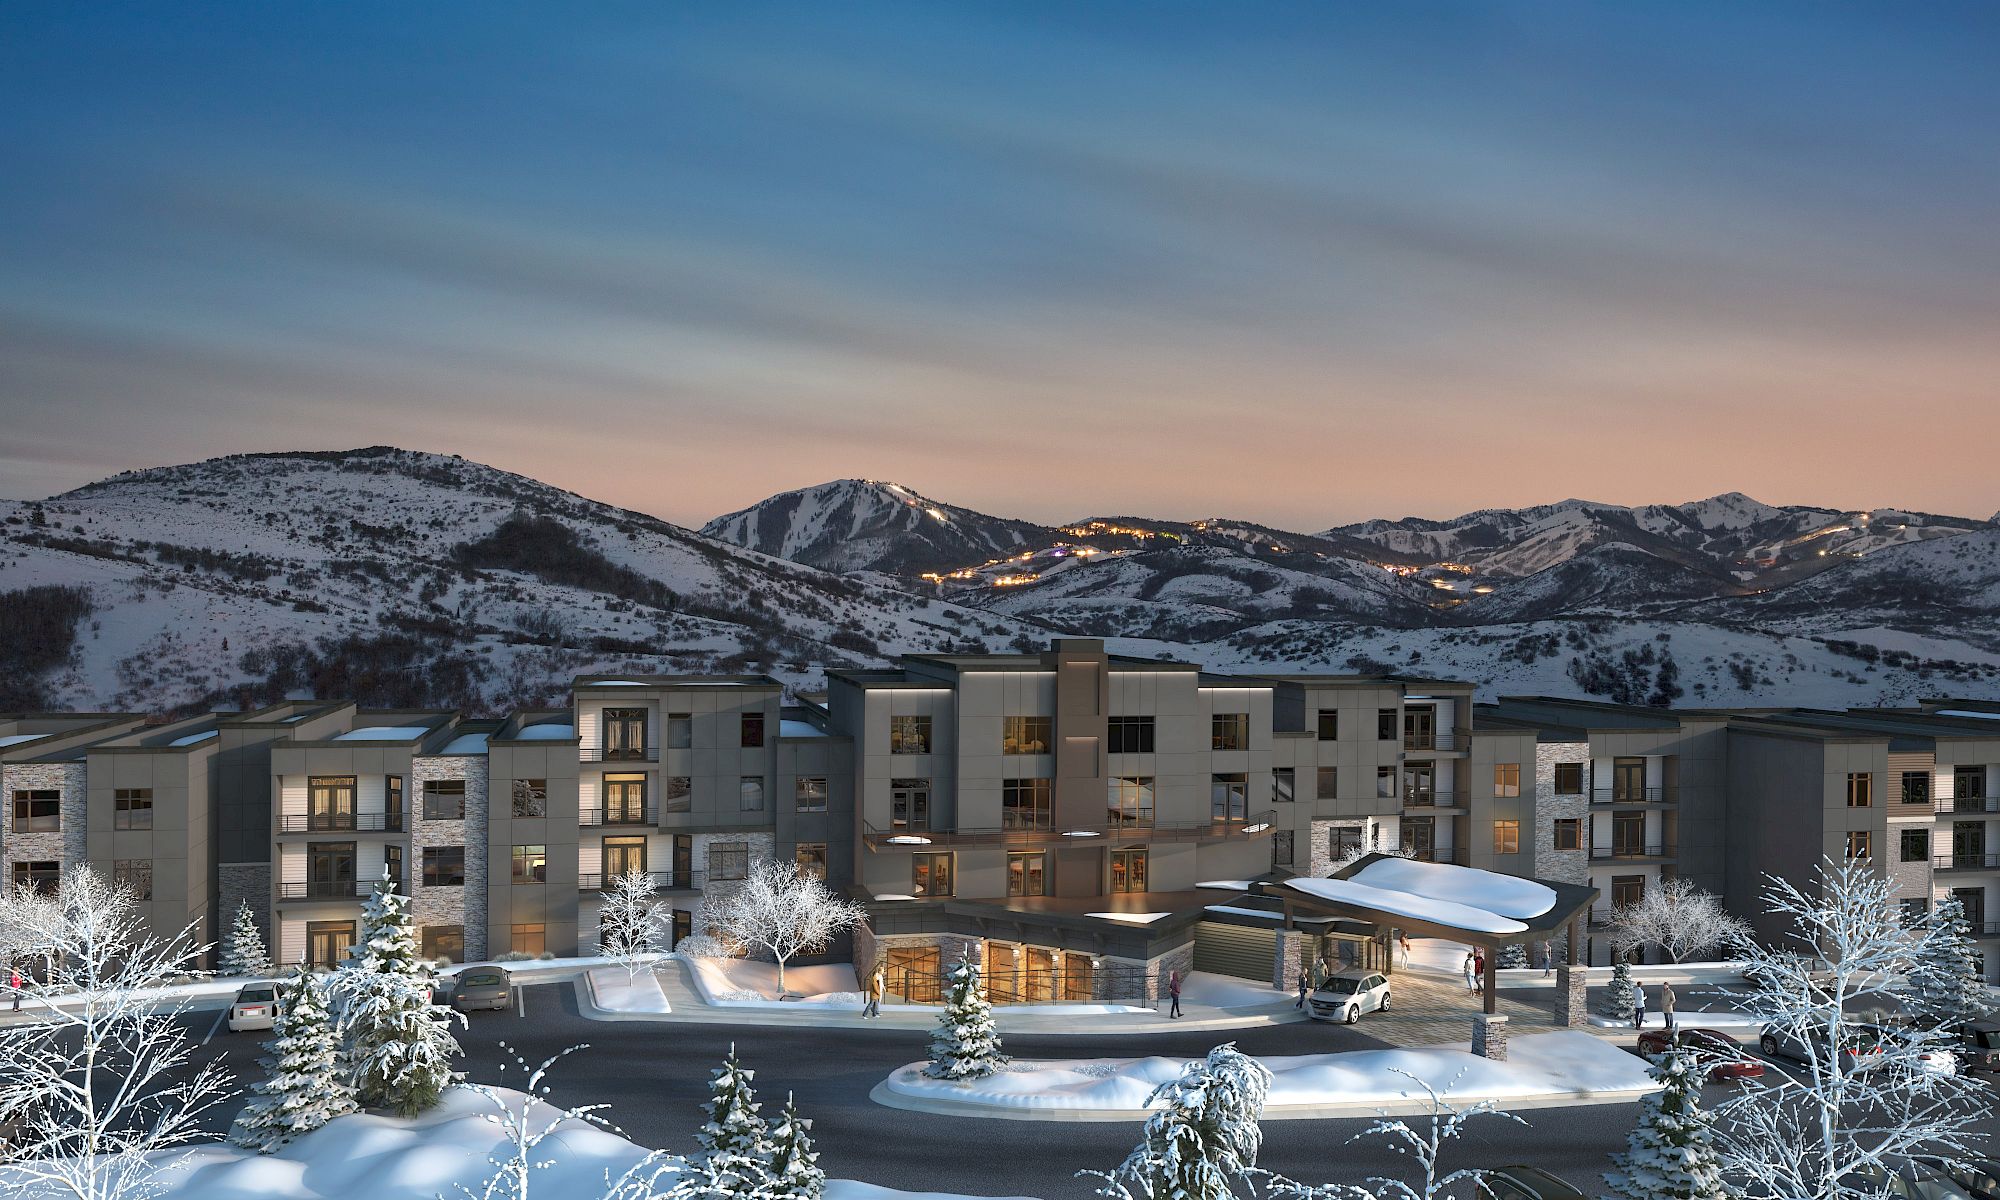 The image shows a modern building complex surrounded by snow-covered trees and mountains at dusk, with a serene, wintry atmosphere completed.